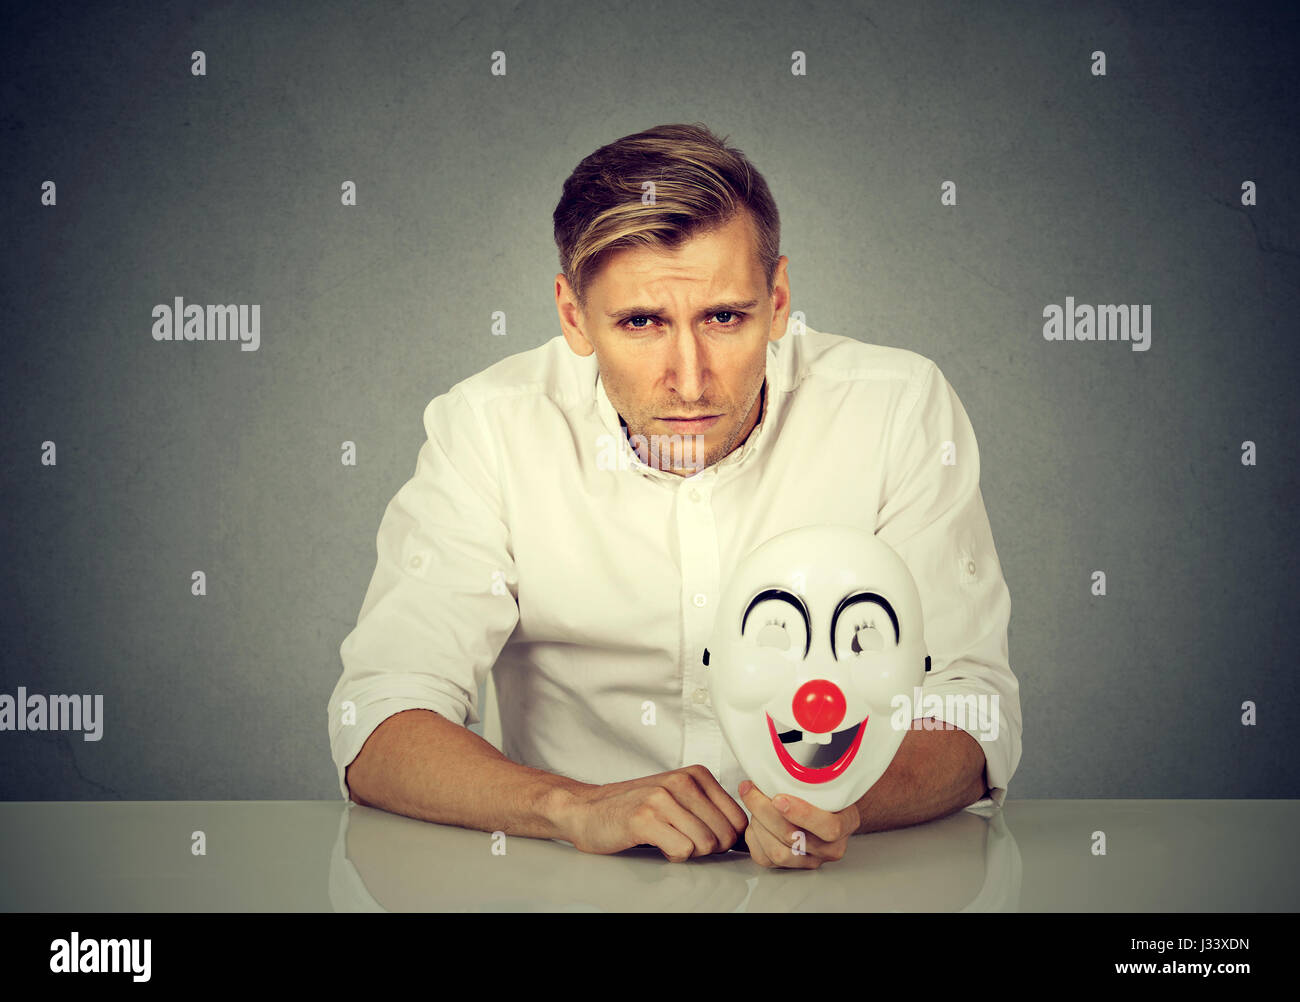 Portrait young upset worried man with sad expression holding clown mask expressing cheerfulness happiness isolated on gray wall background. Human emot Stock Photo